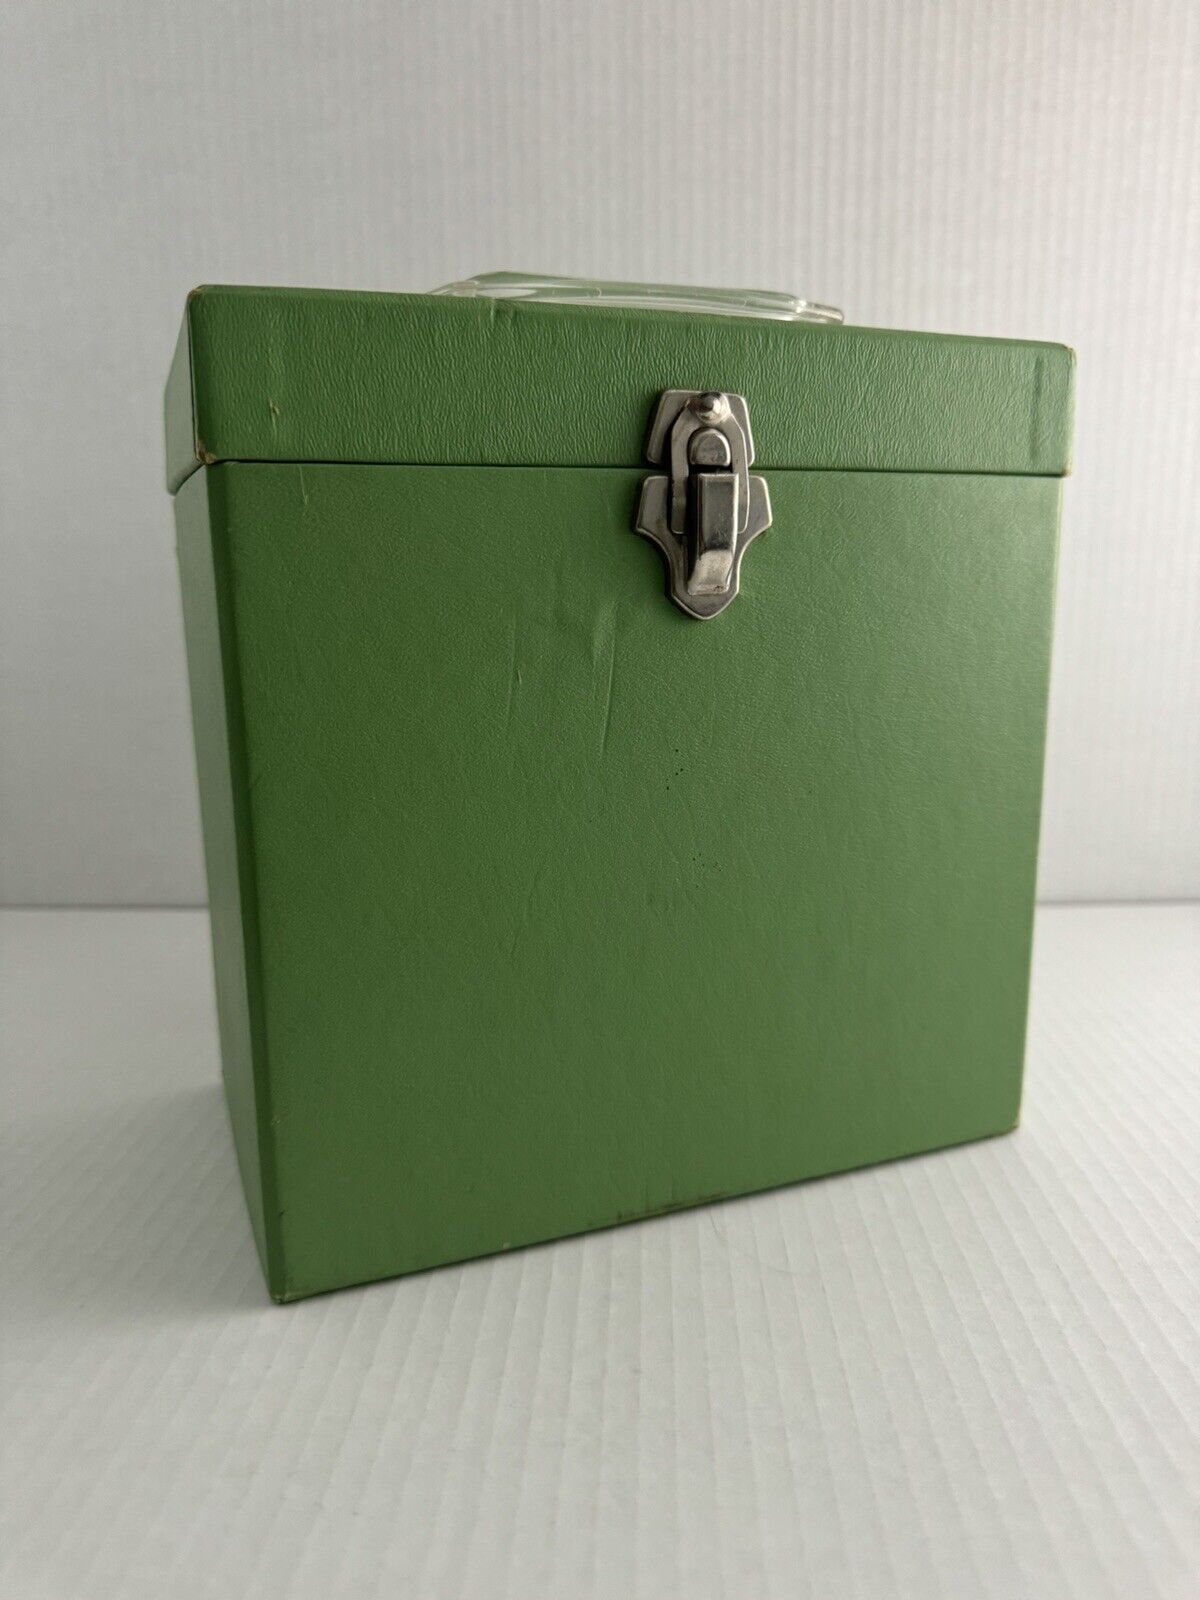 Vintage 45 Record Box Green Cardboard Case Keeper Great Shape Ready2Use 